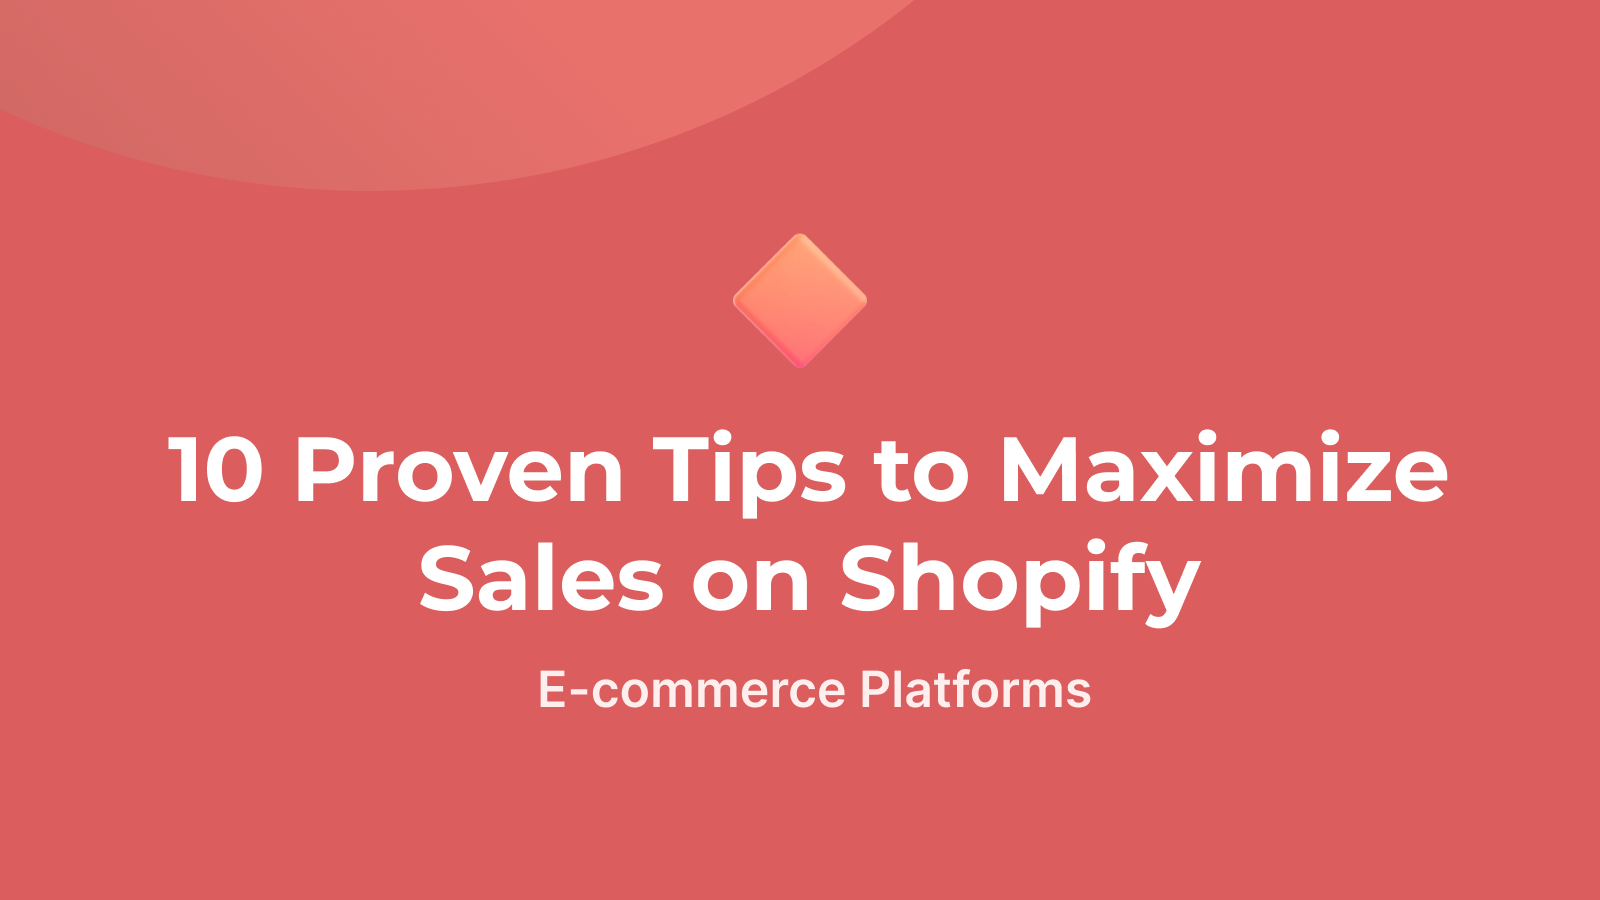 10 Proven Tips to Maximize Sales on Shopify E-commerce Platforms